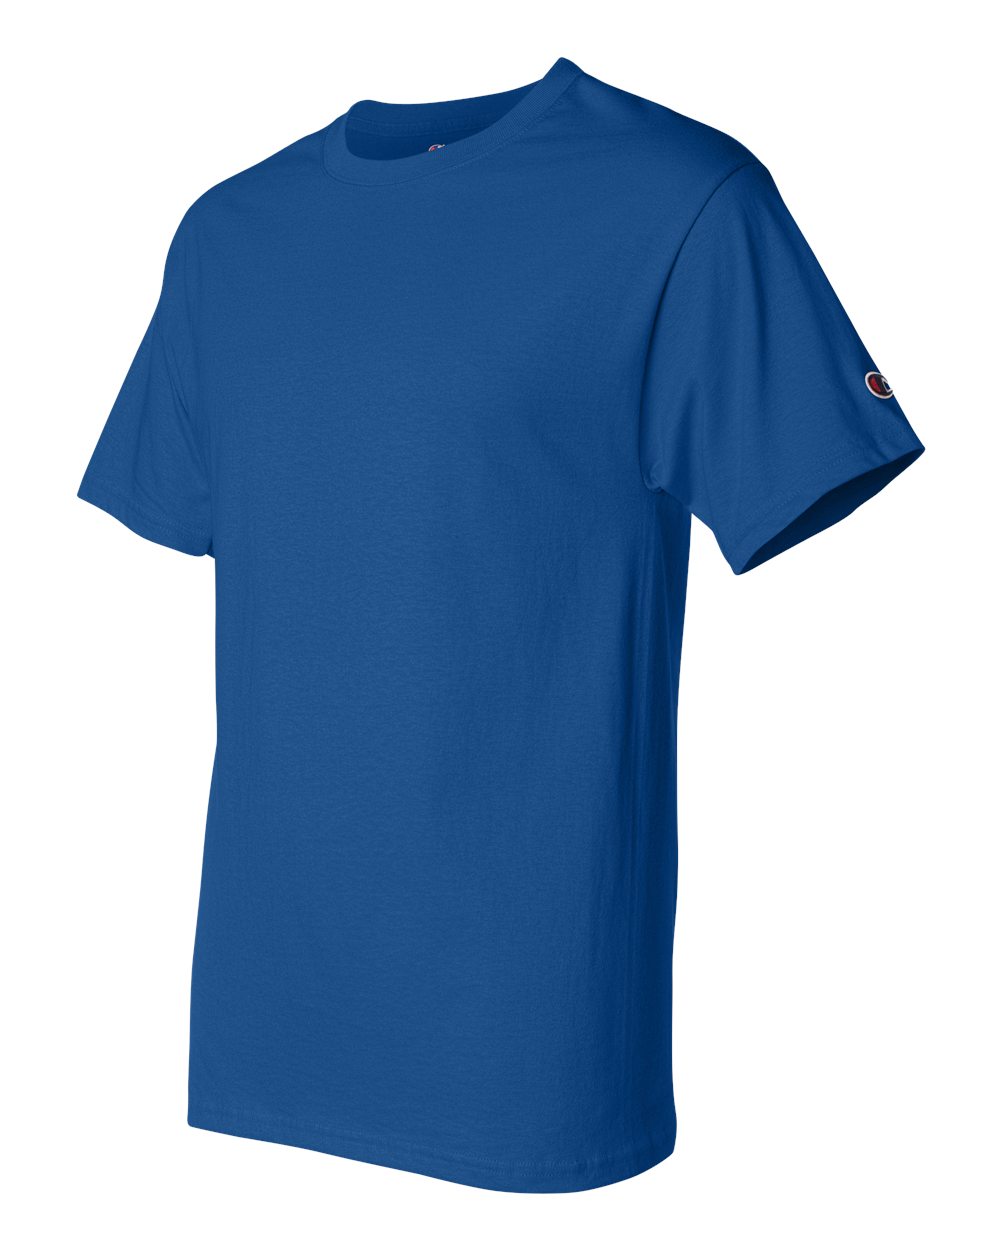 click to view Royal Blue